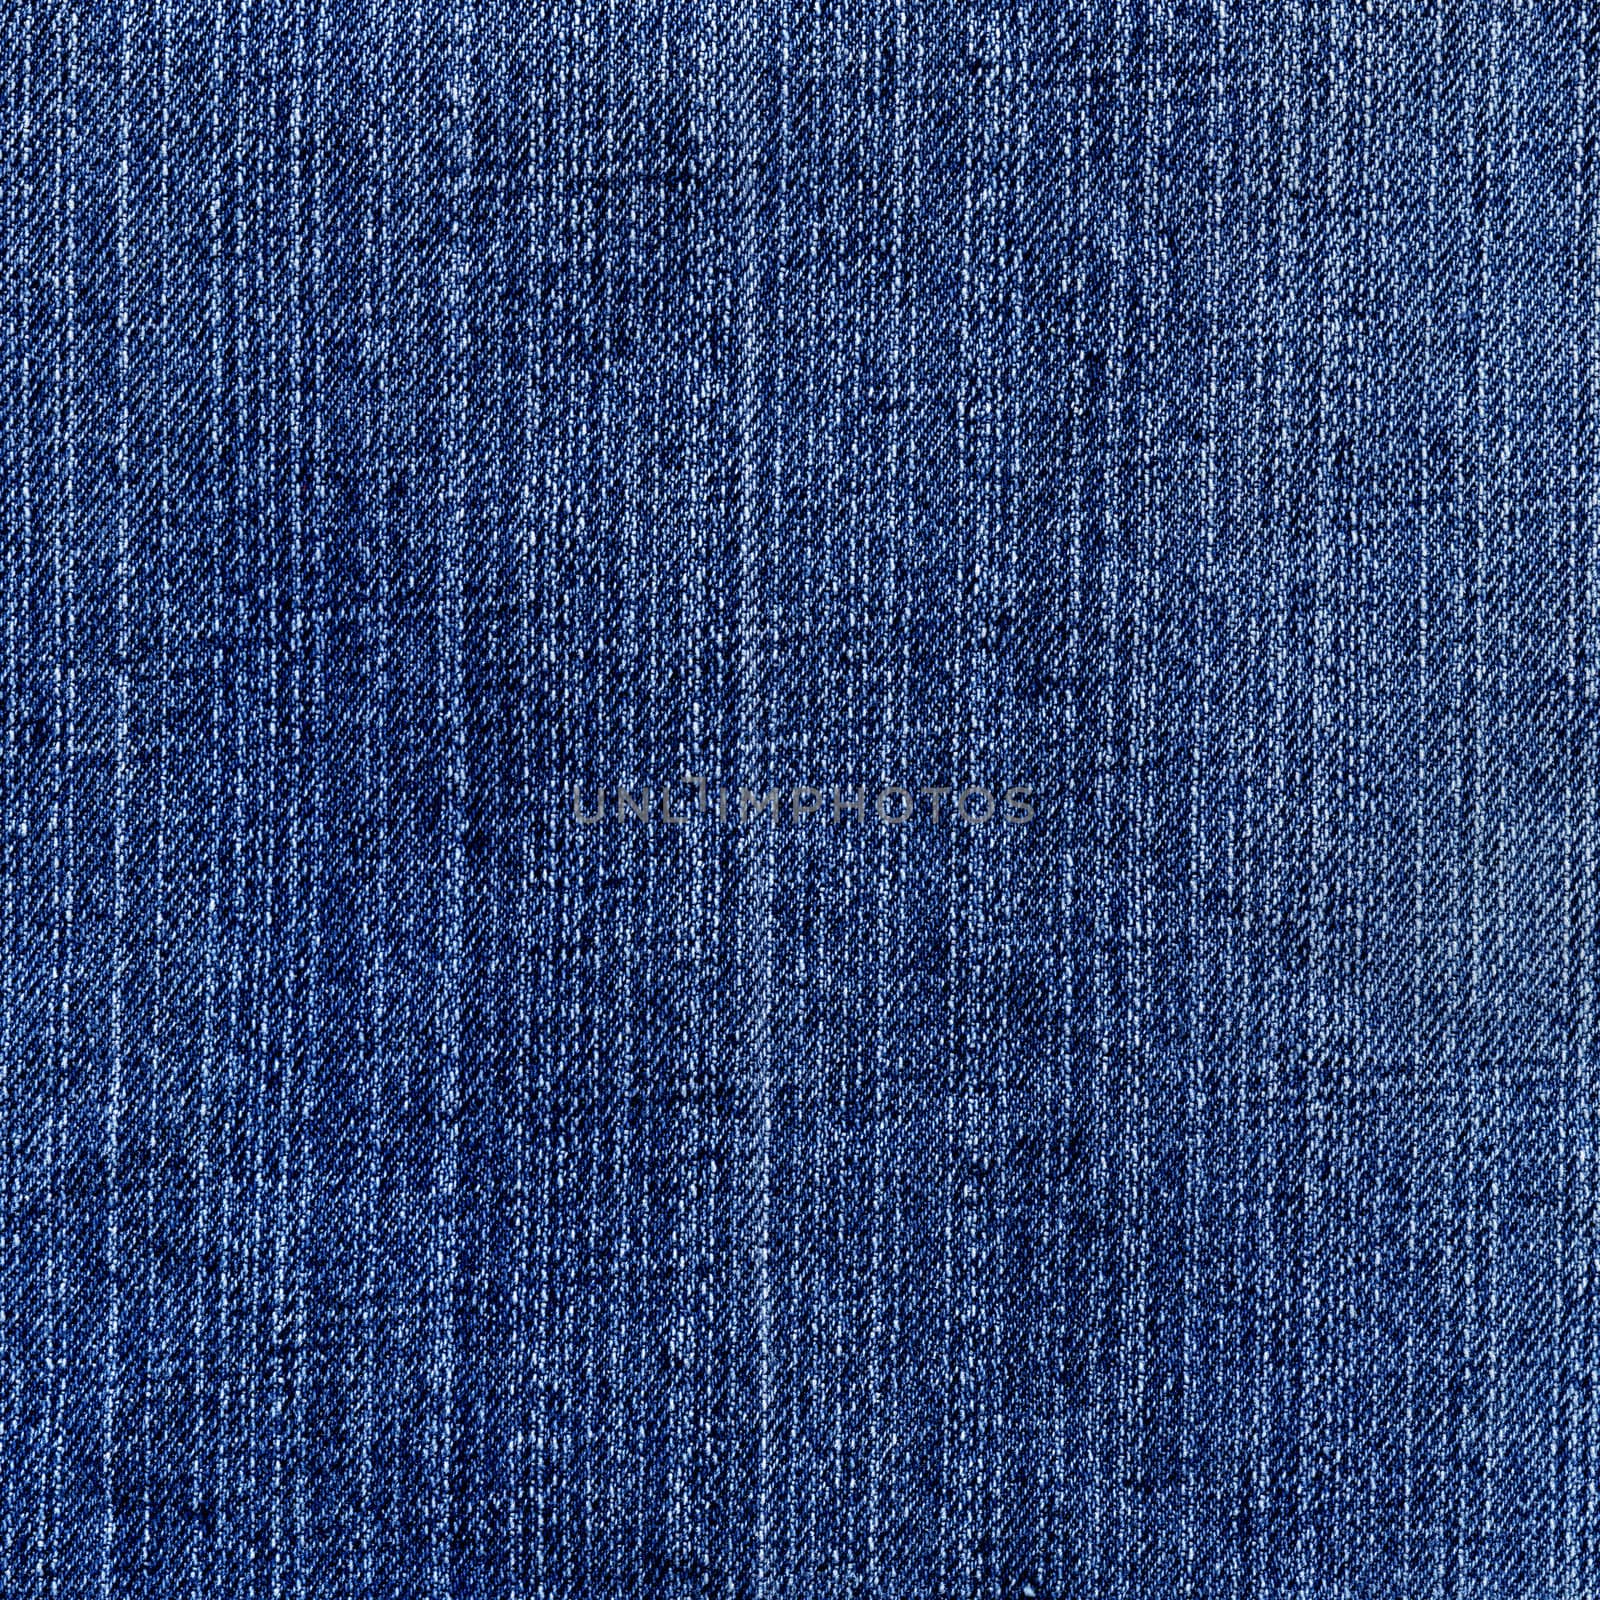 Close-up of blue denim for texture or background